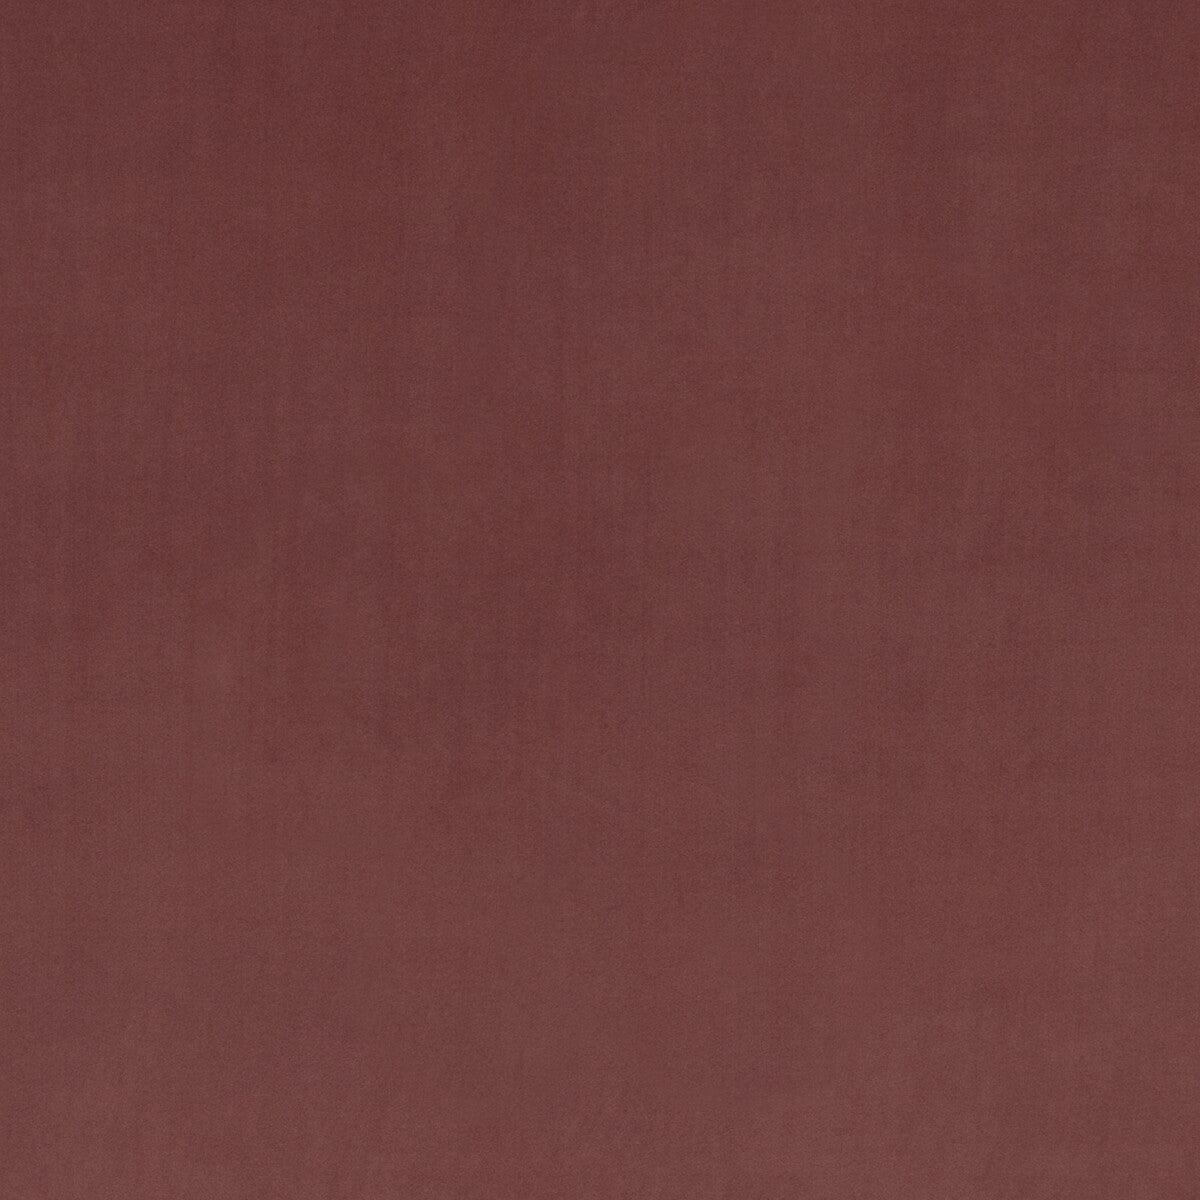 Montpellier Velvet fabric in tuscan red color - pattern PF50417.438.0 - by Baker Lifestyle in the Carnival collection